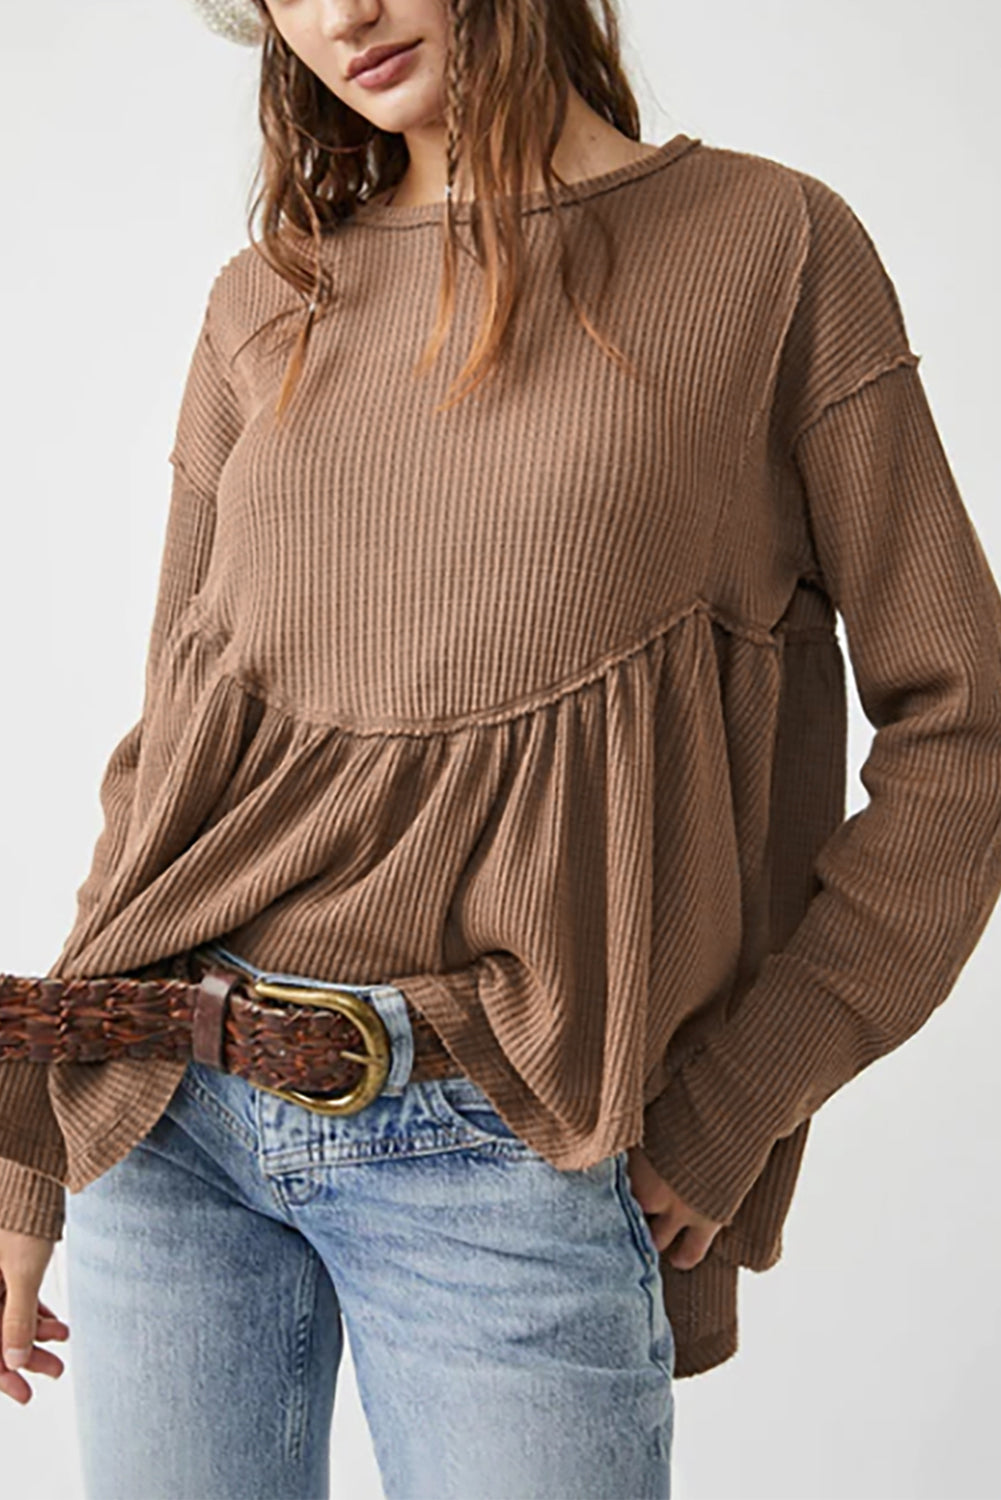 Cali Chic Brown Solid Color Ribbed Long Sleeve Peplum Blouse